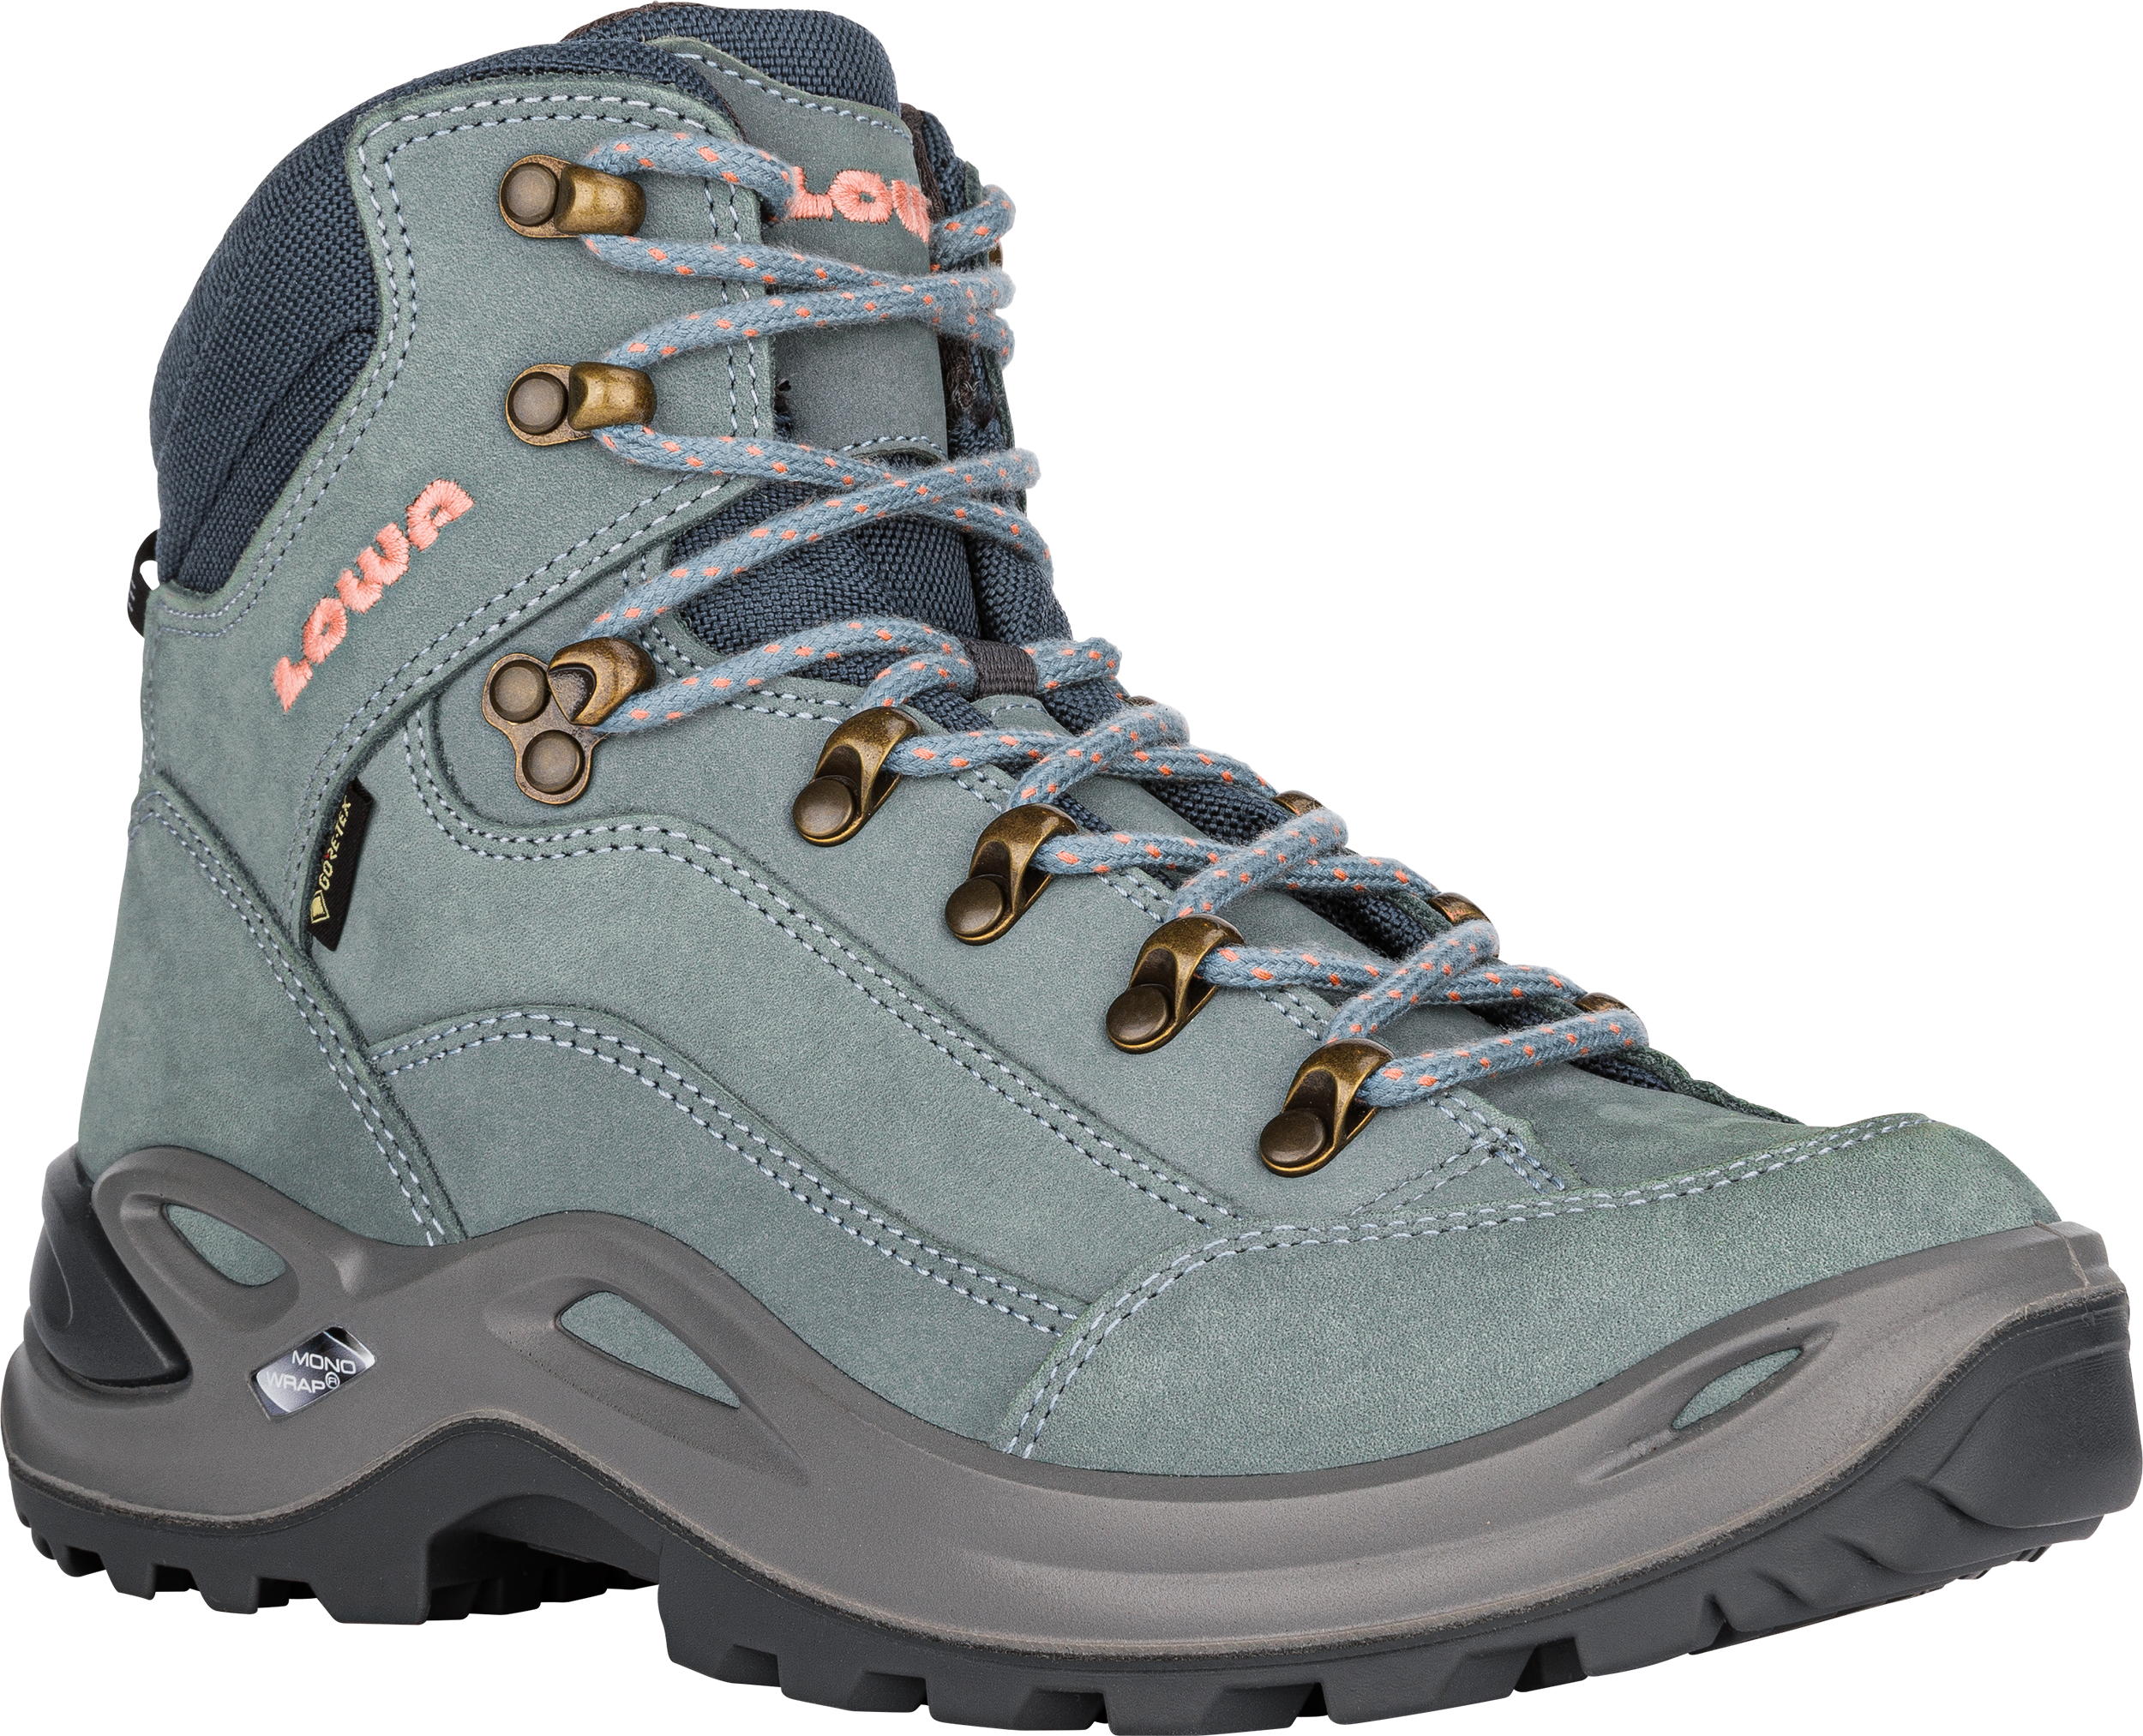 GTX MID Ws: ALL TERRAIN CLASSIC shoes for women | EE